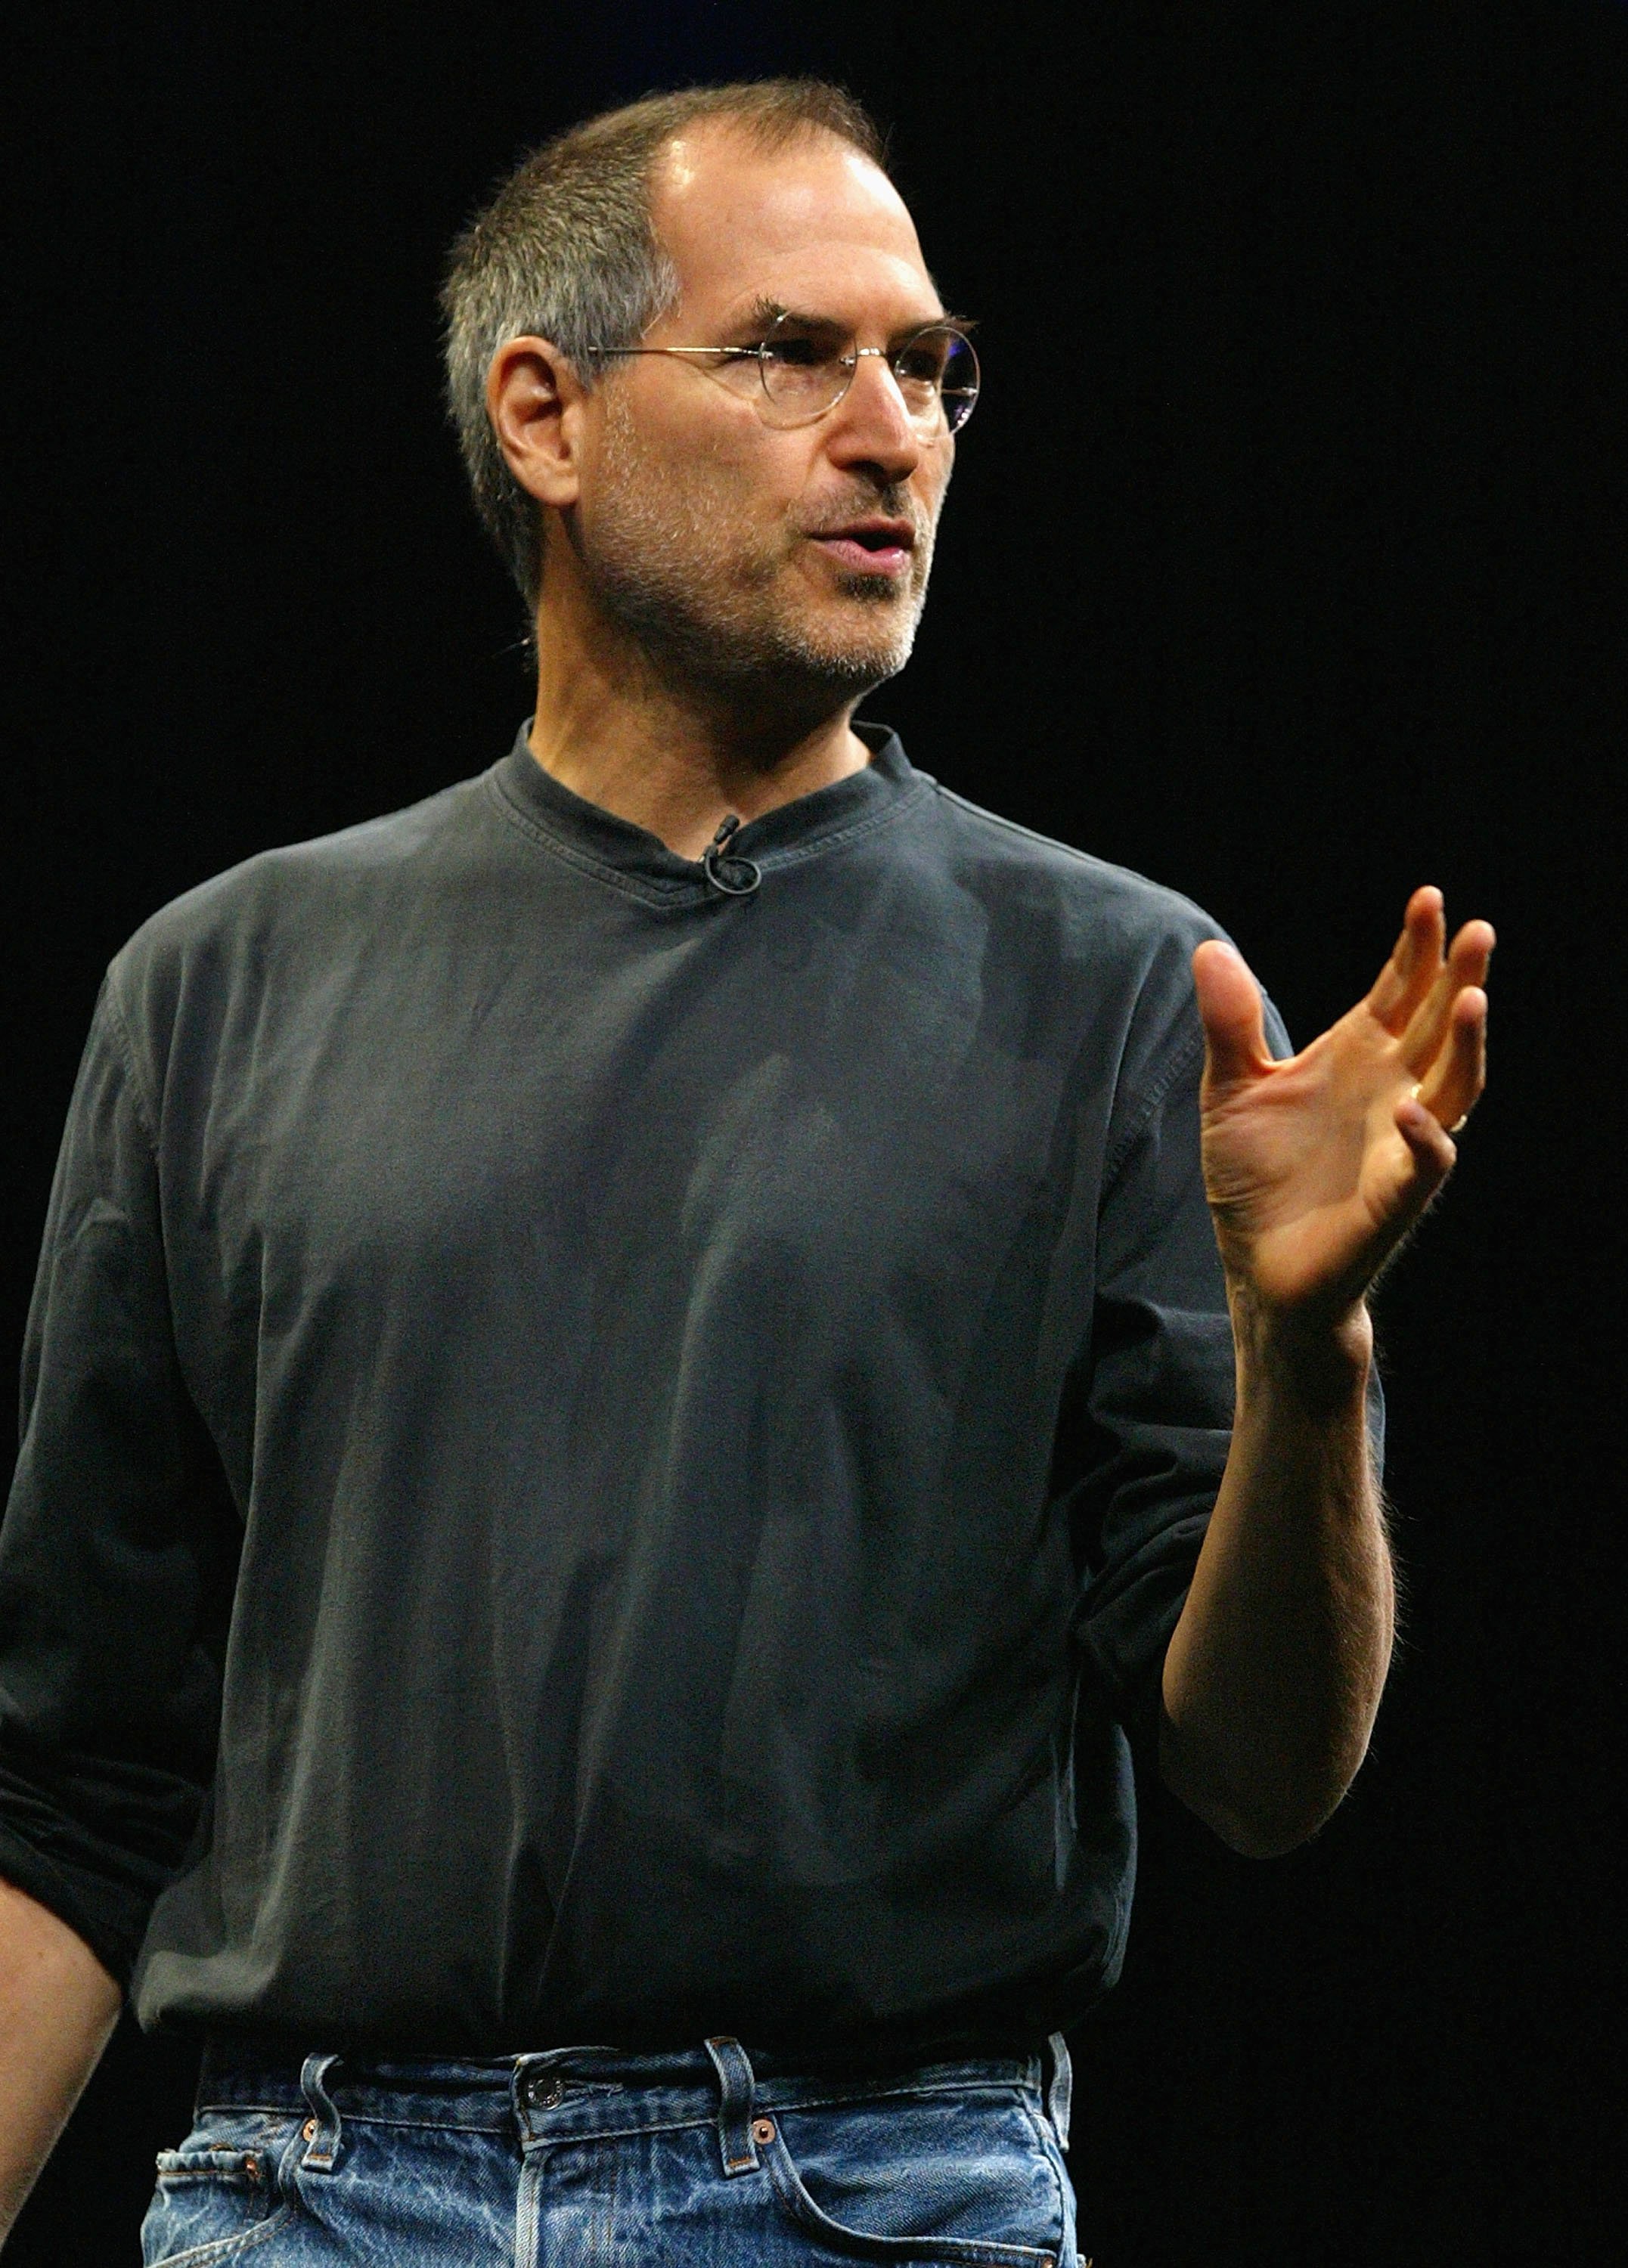 Steve Jobs delivers the keynote address at the 2004 Worldwide Developers Conference June 28, 2004, in San Francisco, California. | Source: Getty Images.